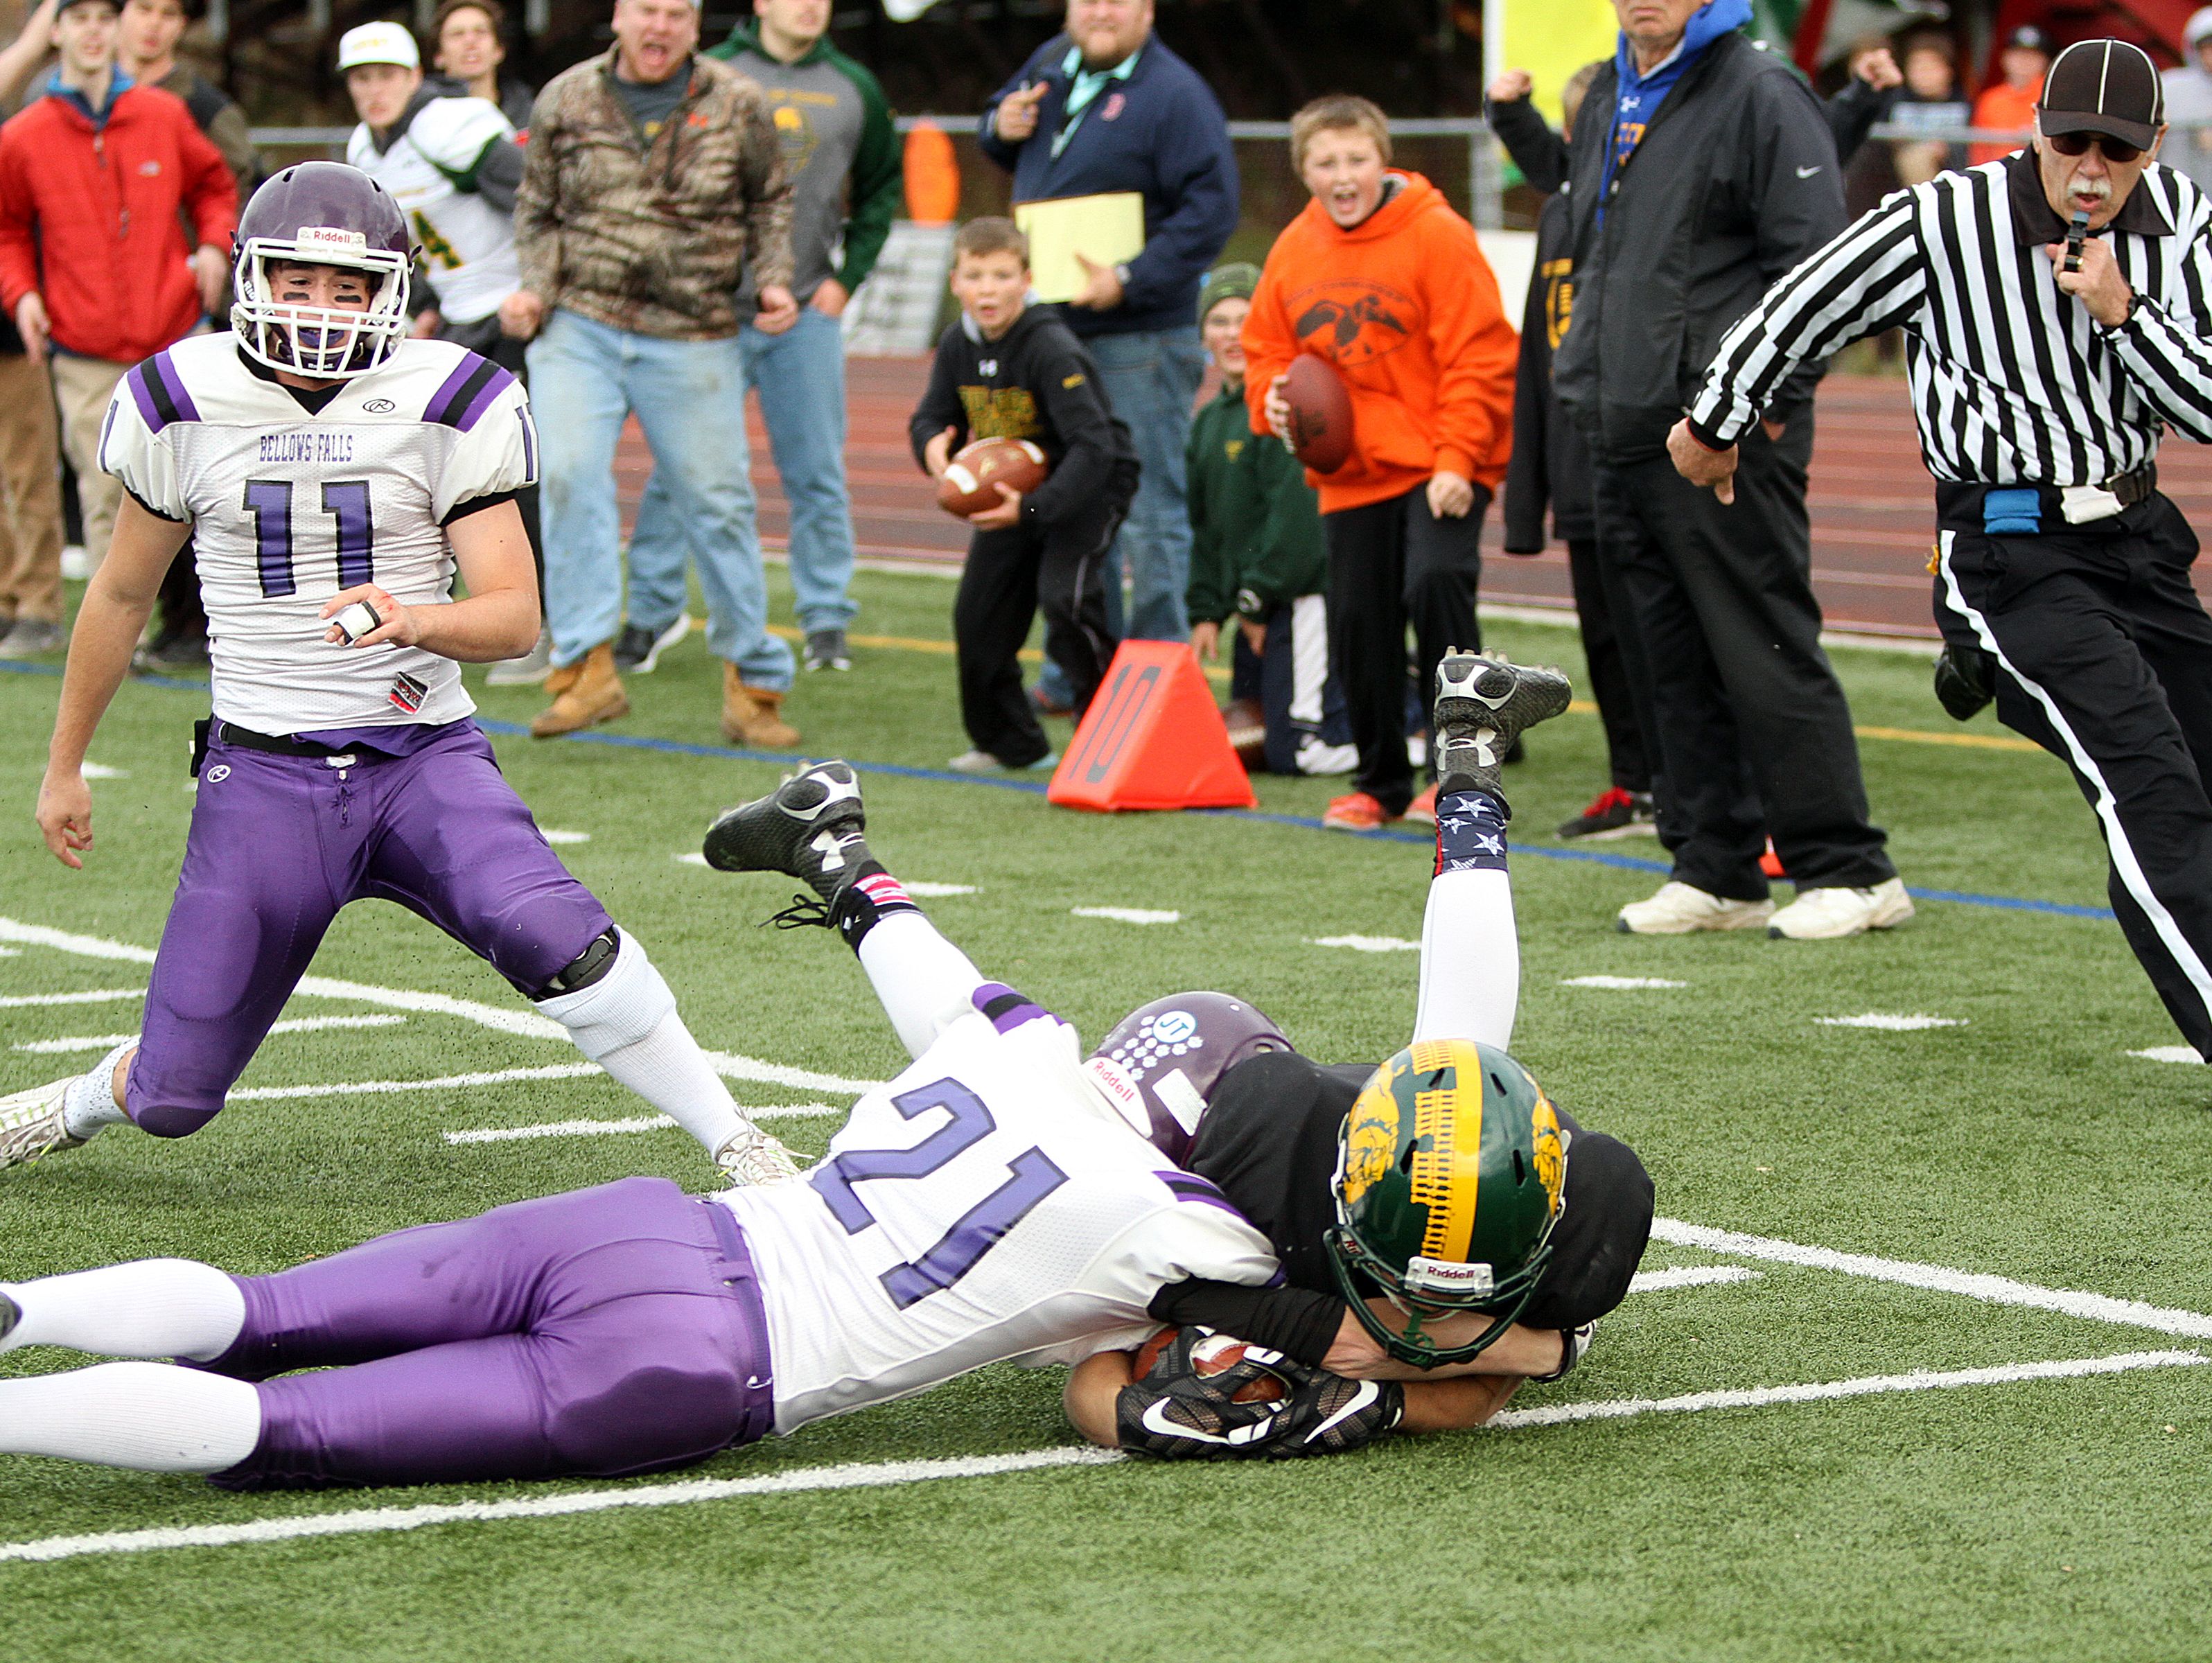 Burr and Burton's Carter Vickers scores a third-quarter touchdown despite the tackle of Bellows Falls' Jacob Streeter the Bulldogs' 28-7 win over Bellows Falls in the Division II state high school football championship game on Saturday, Nov. 7, 2015.